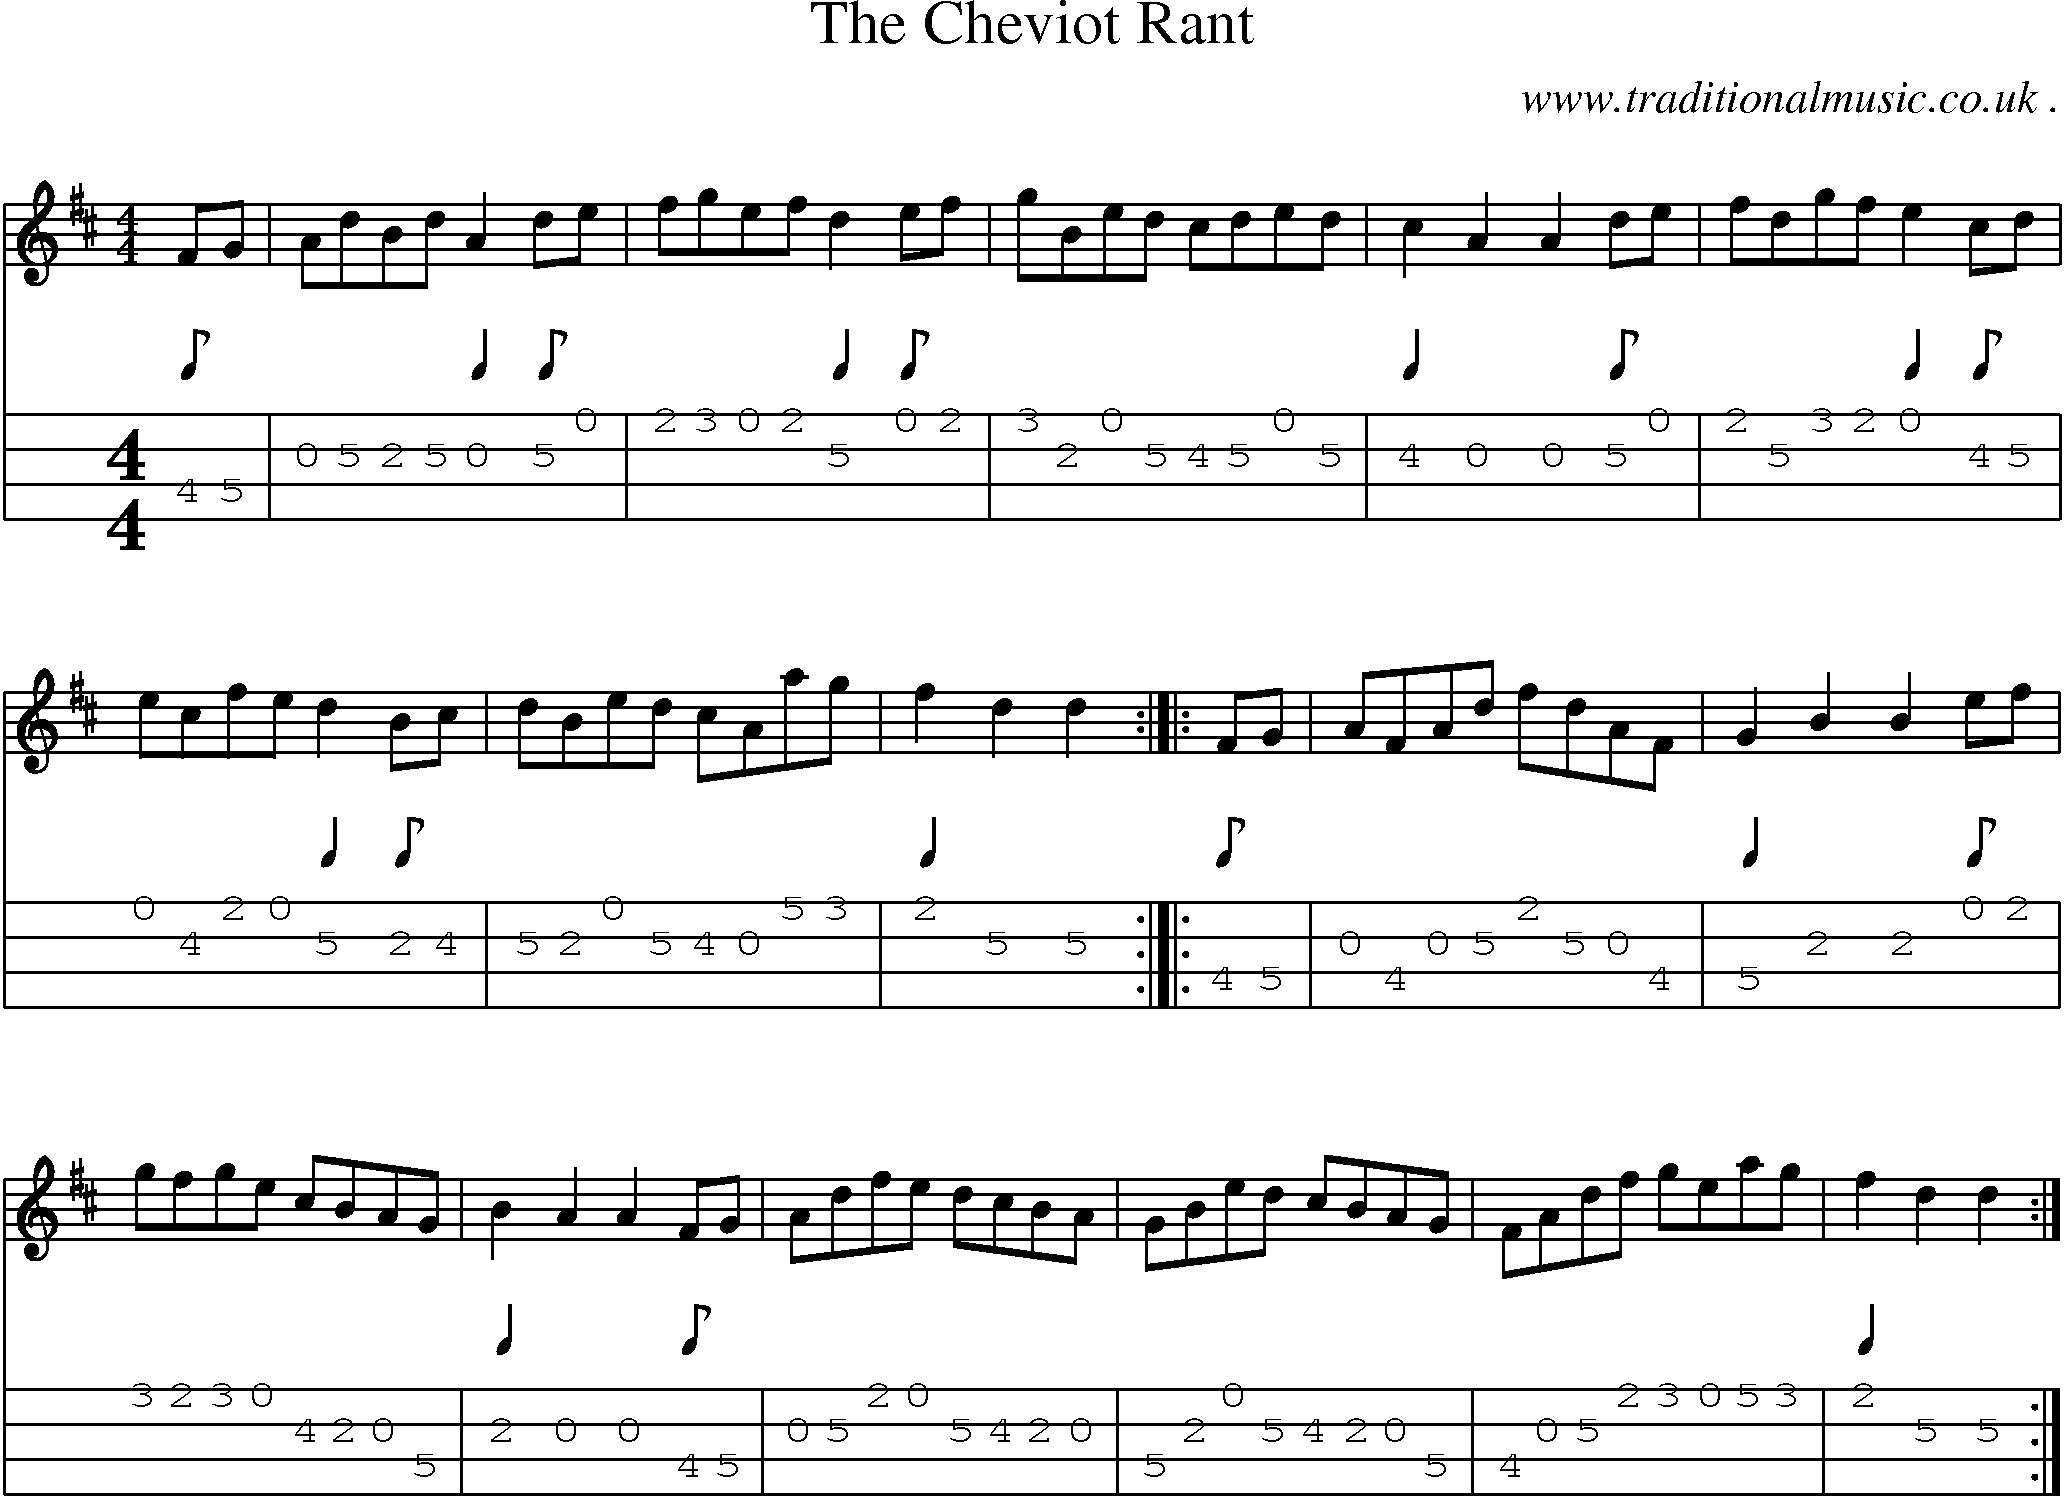 Sheet-music  score, Chords and Mandolin Tabs for The Cheviot Rant